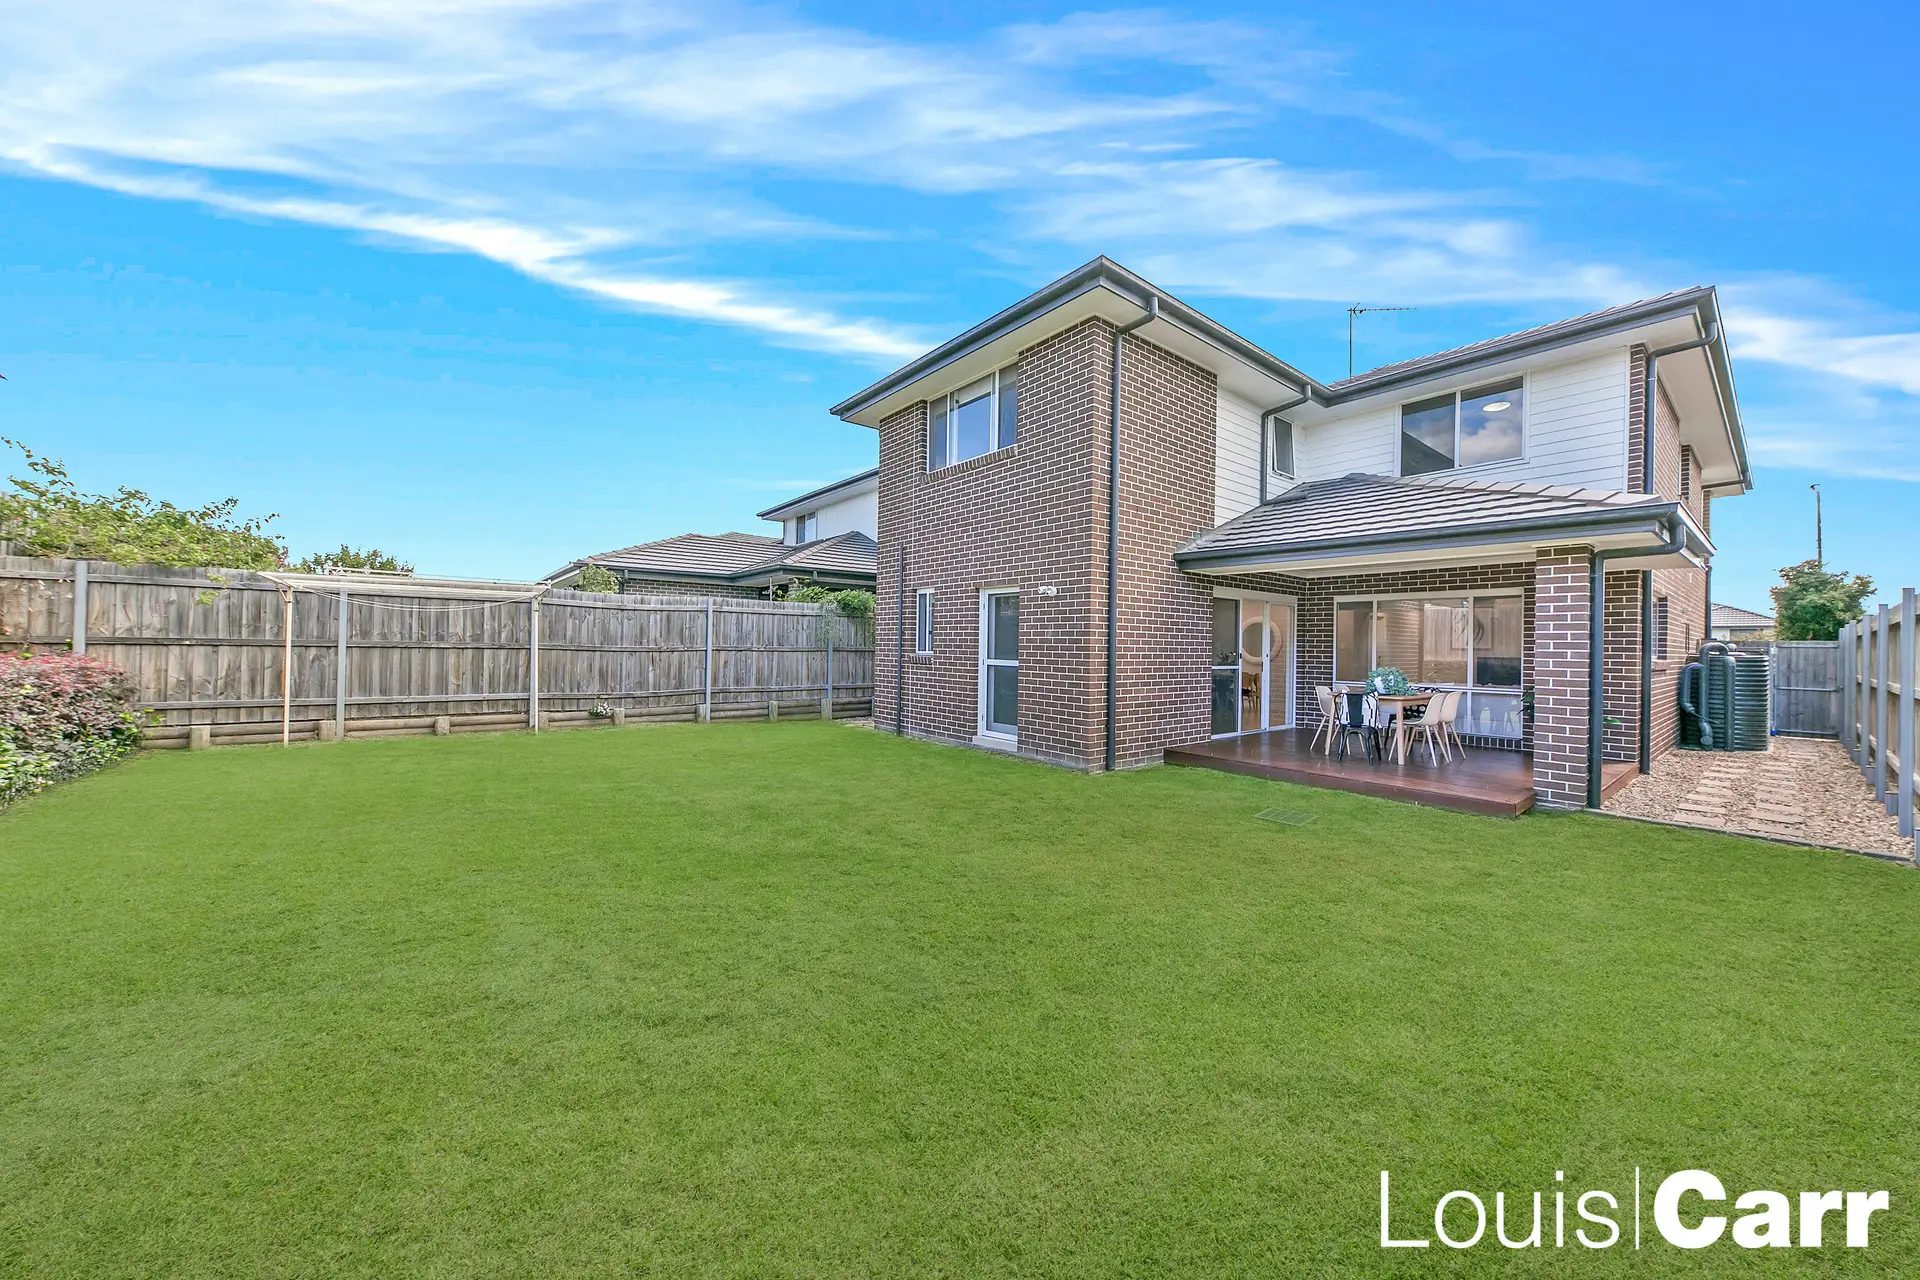 Photo #3: 4 Carisbrook Street, North Kellyville - Sold by Louis Carr Real Estate